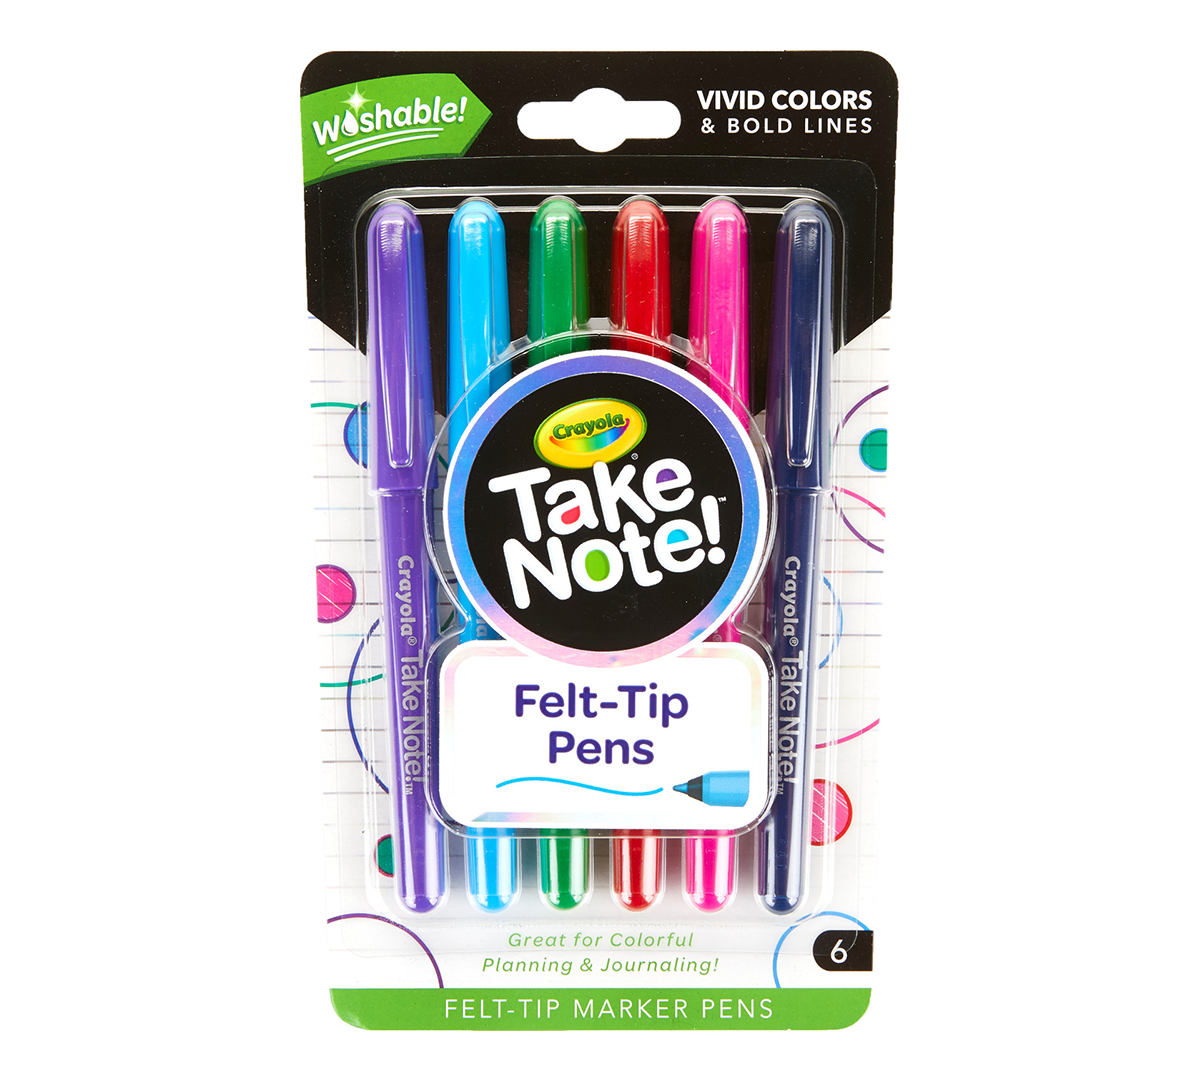 Details about   Crayola Take Note Felt Tip Pens Vivid Colors & Bold Lines Washable 6 Count NEW 